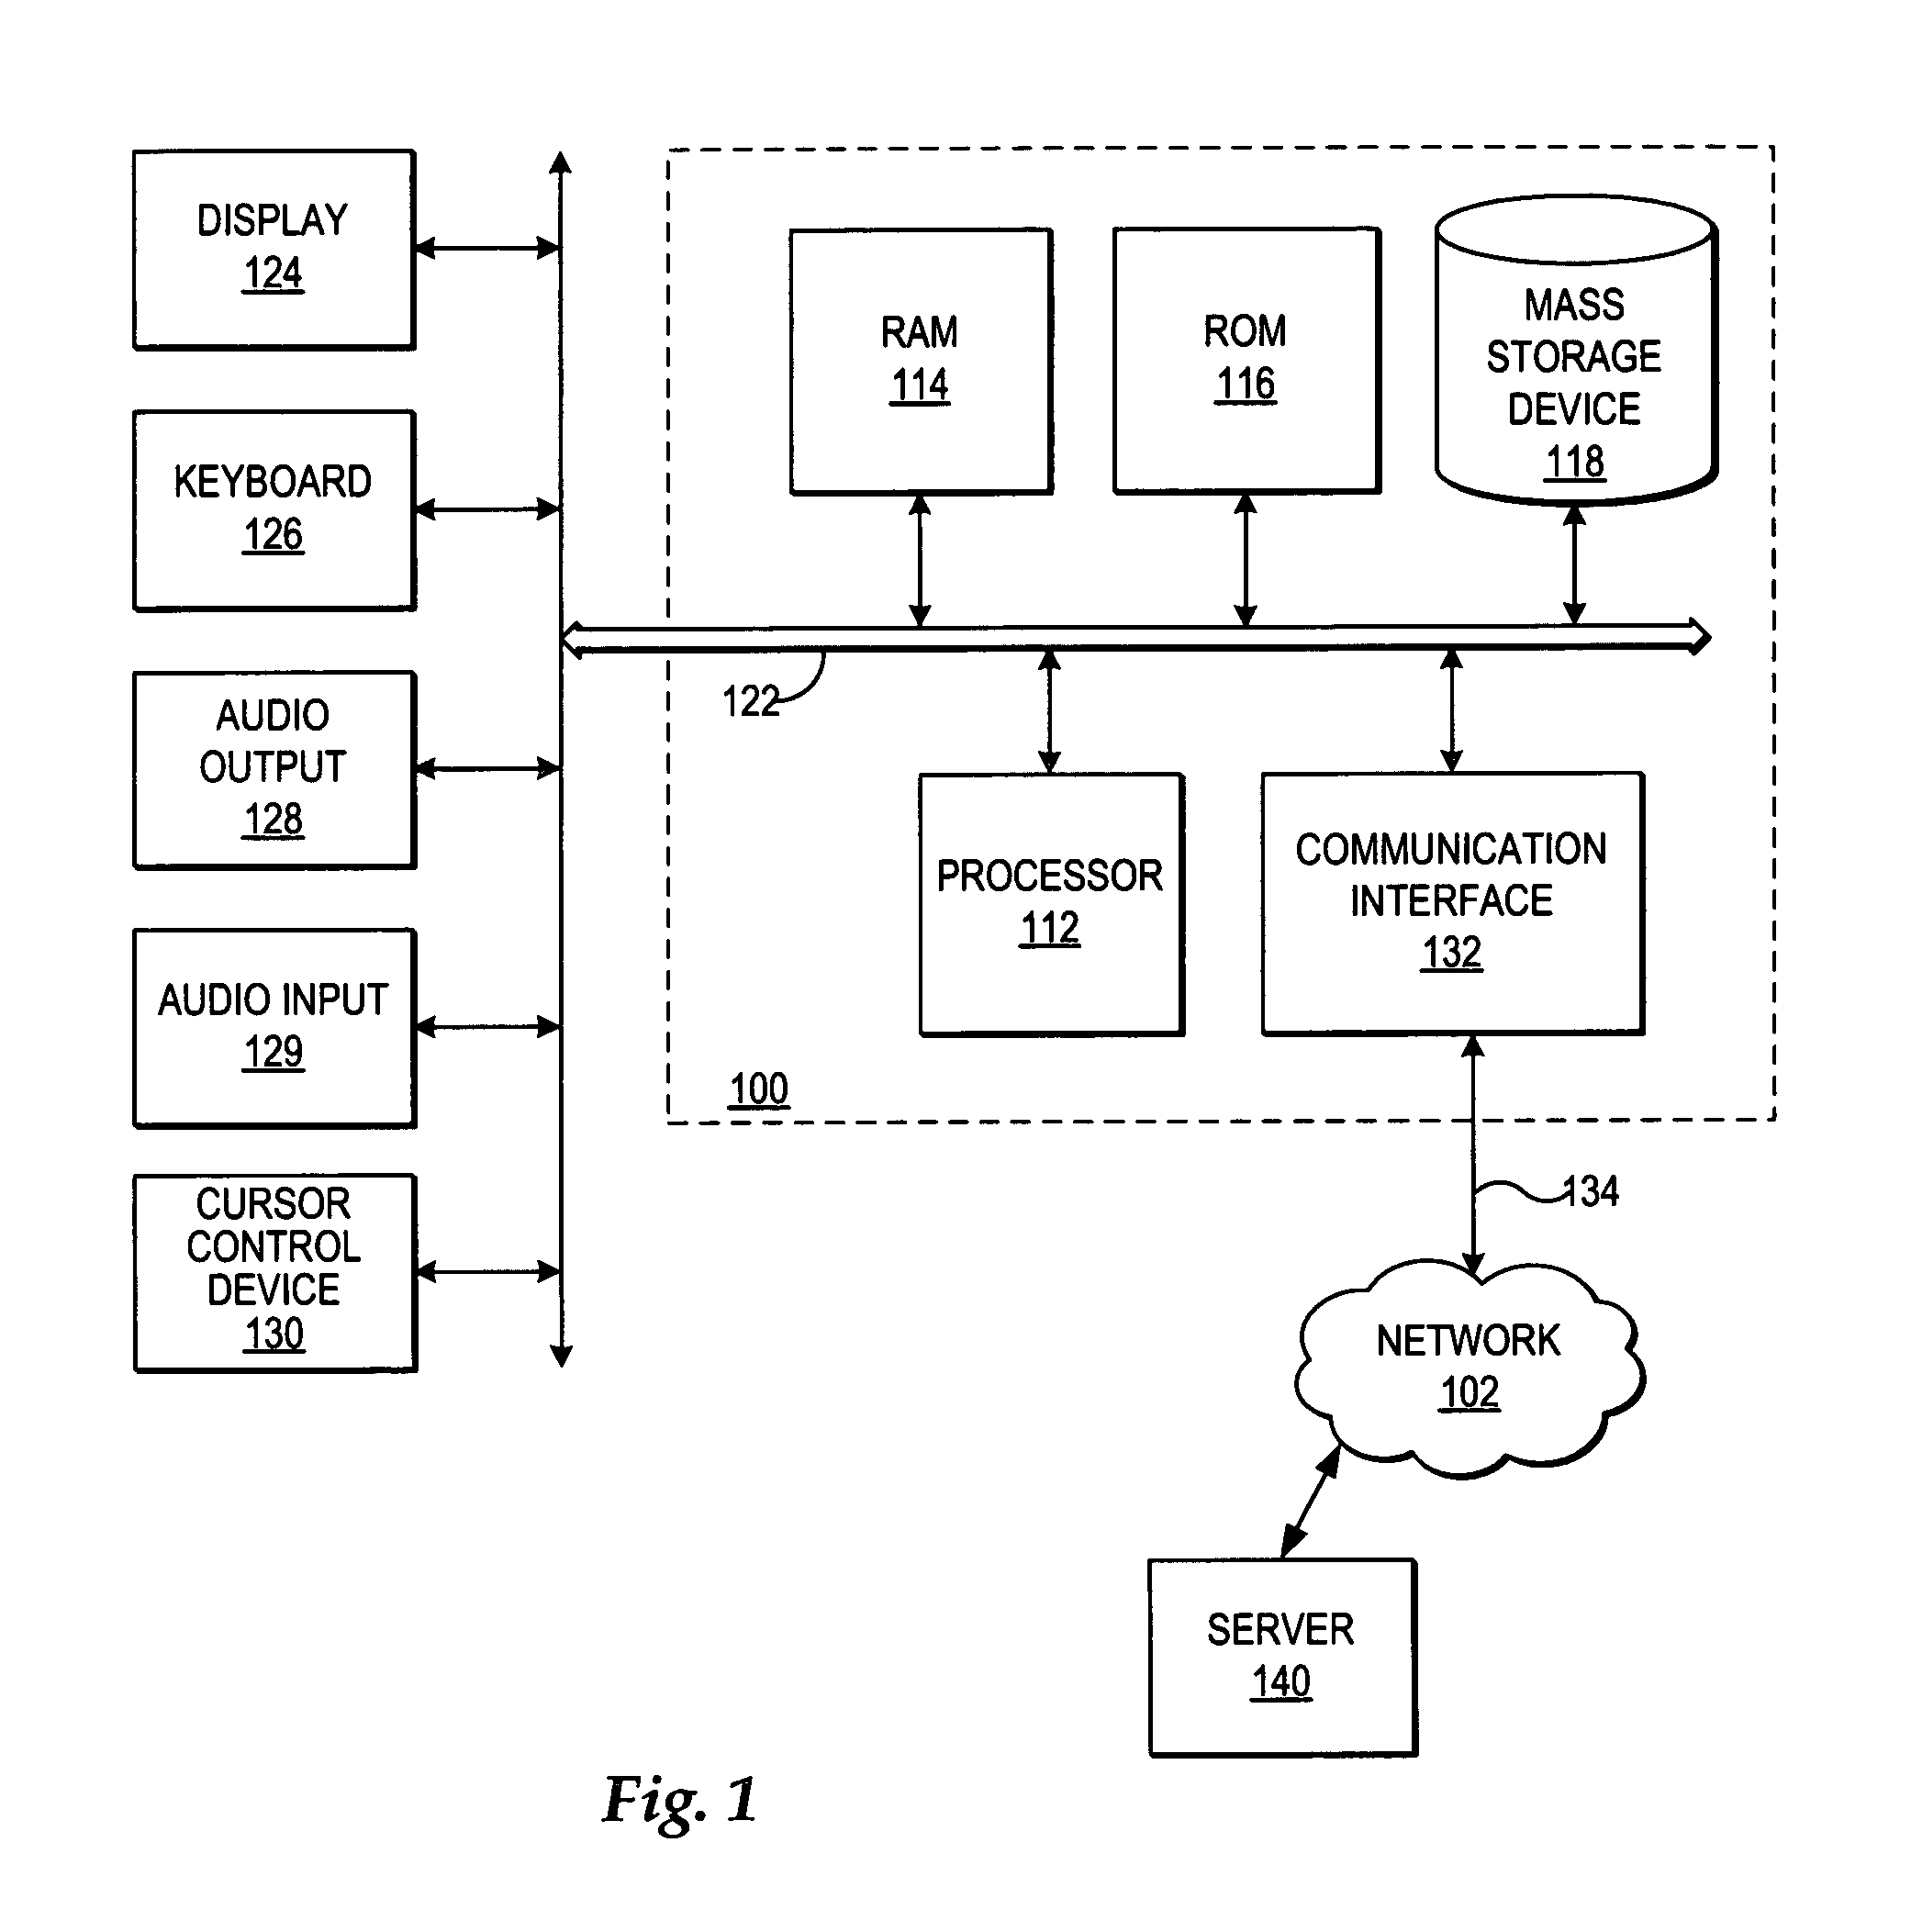 Automated distribution of an instant messaging request for an unavailable intended recipient to a backup recipient